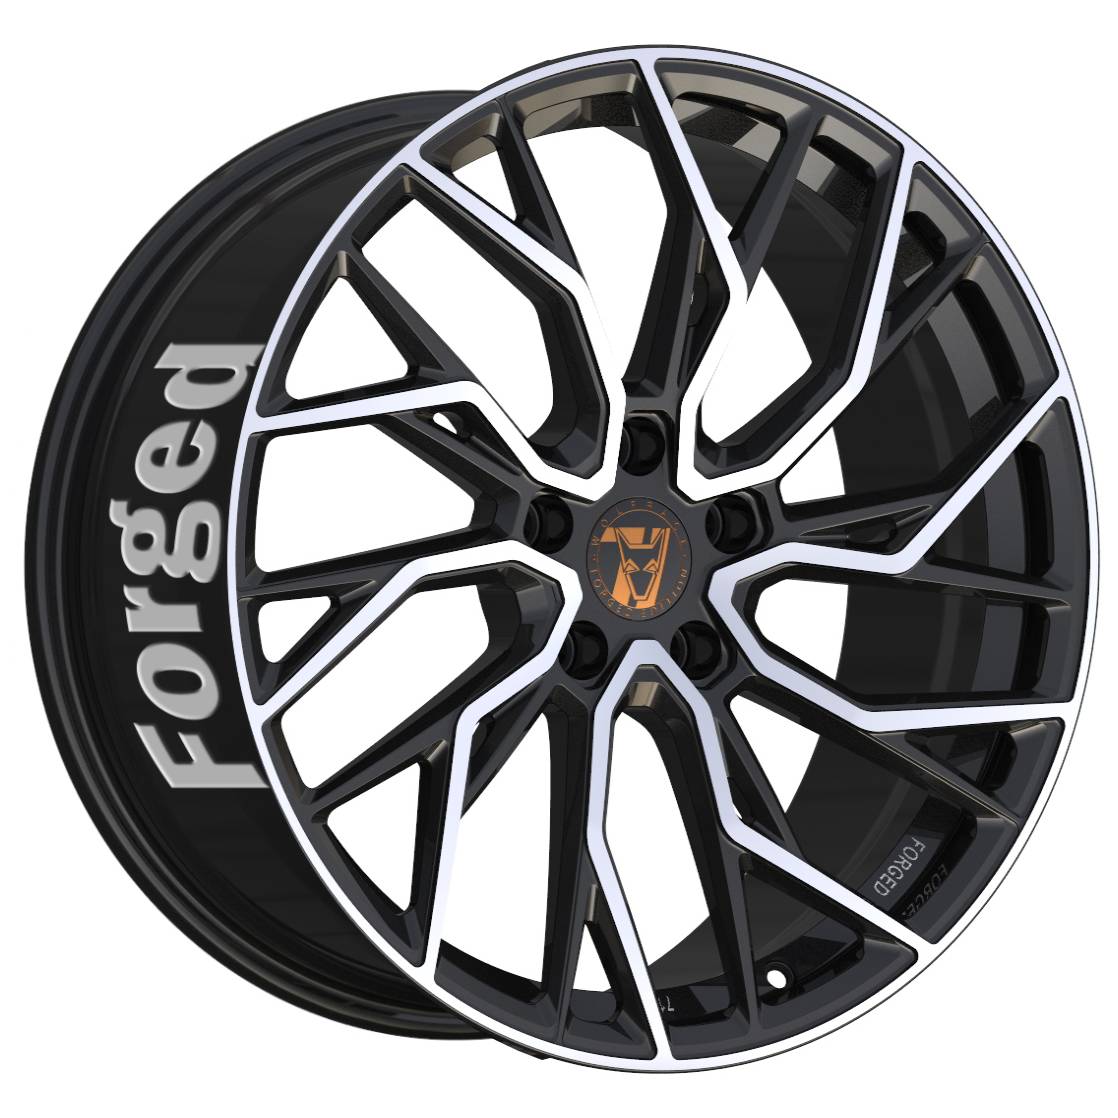 Jantes alu Demon Wheels 71 Forged Edition Voodoo Forged [13x23] -5x114.3- ET 20